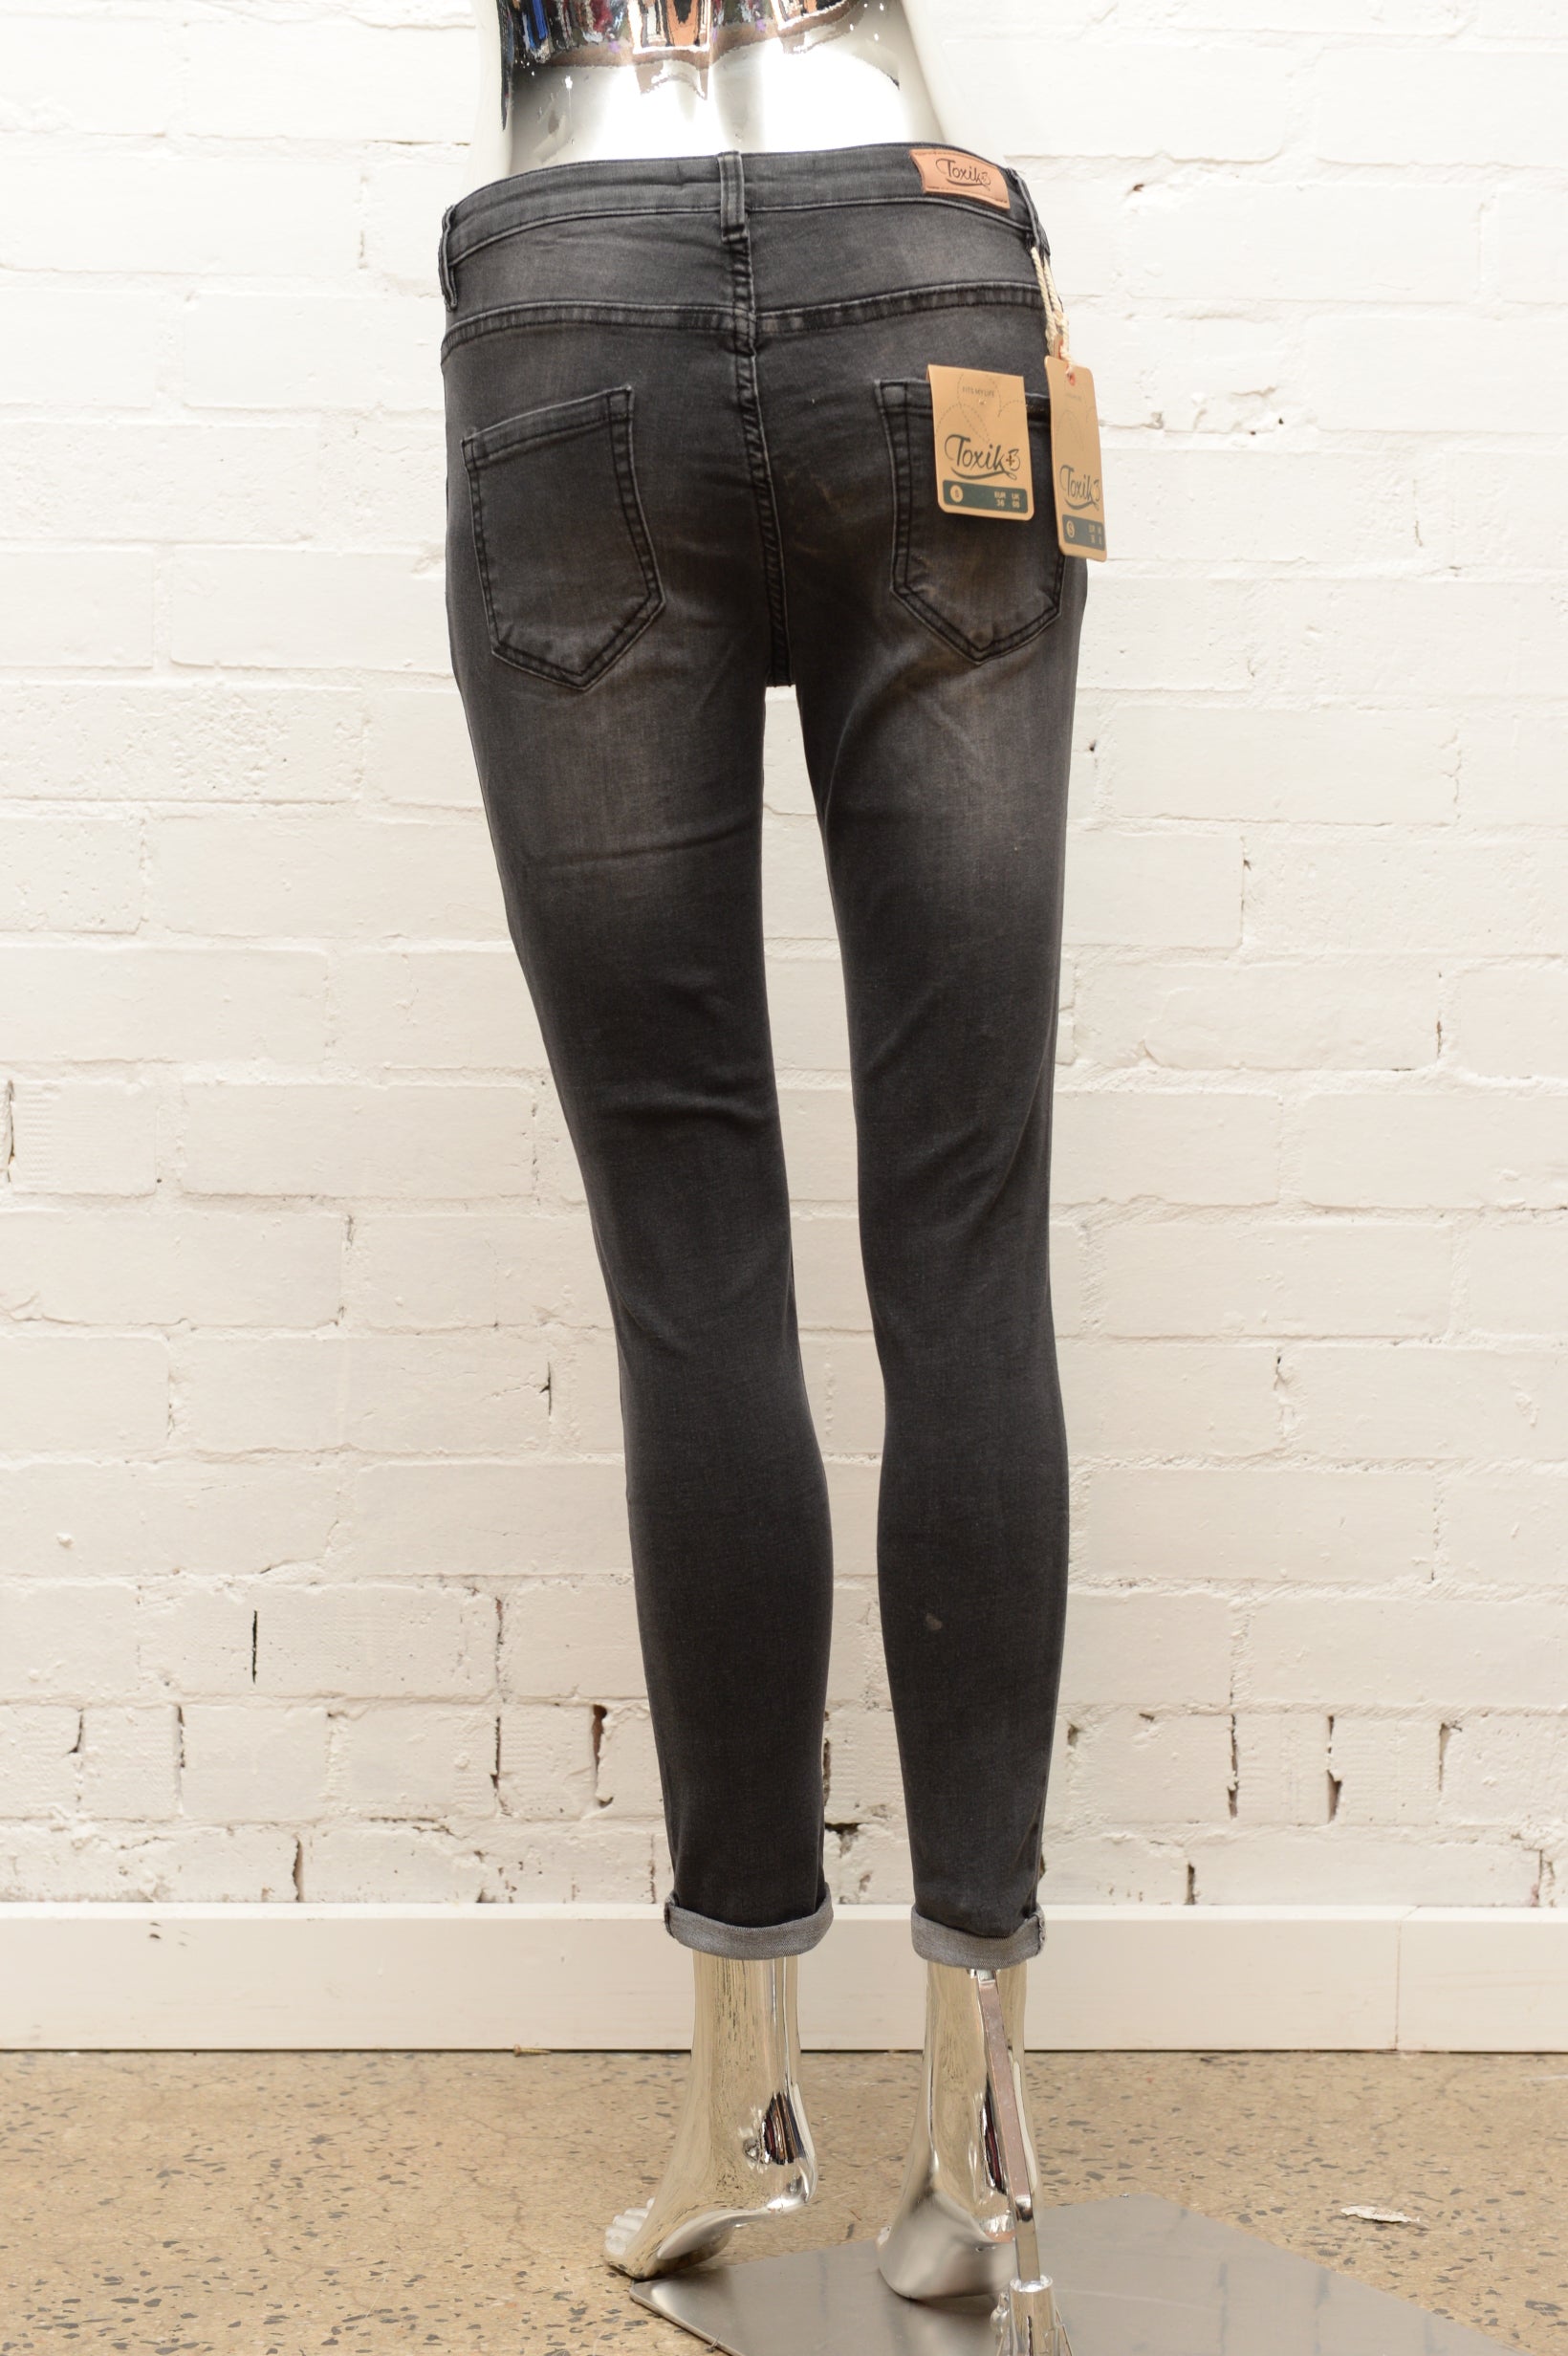 Products - daylesford-jeans - daylesford-jeans